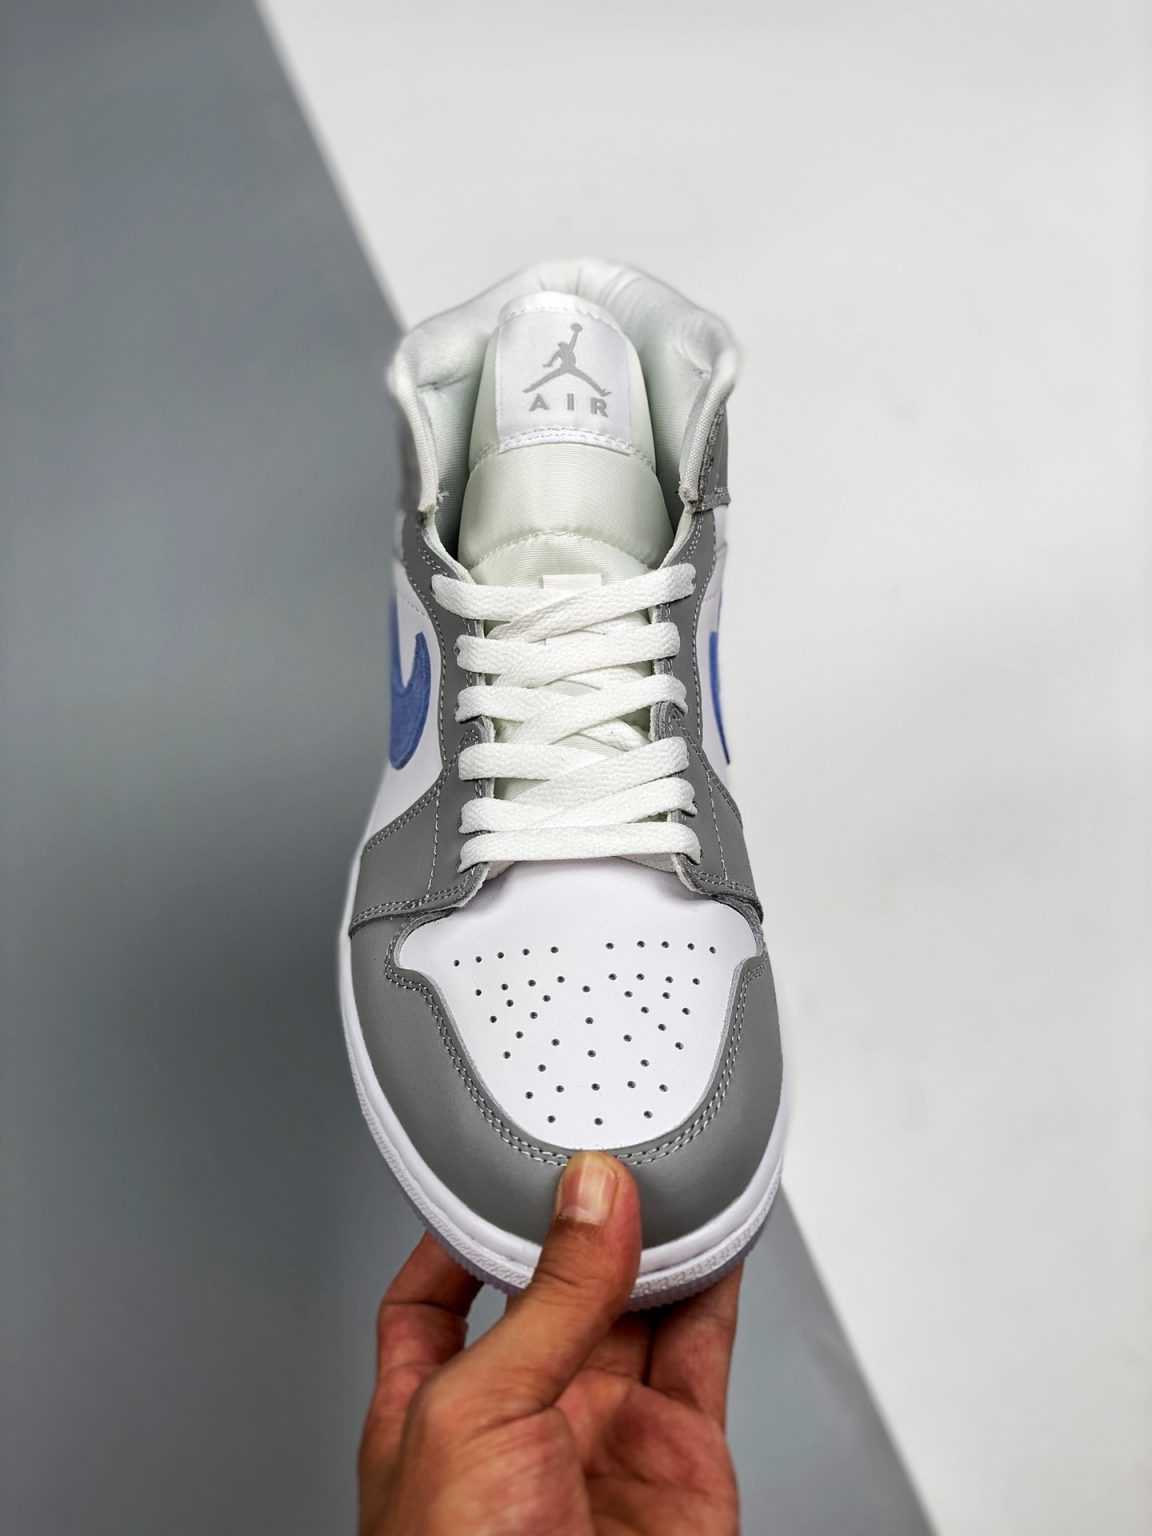 Air Jordan 1 Mid White Grey Blue With Icy Soles – Sneaker Hello